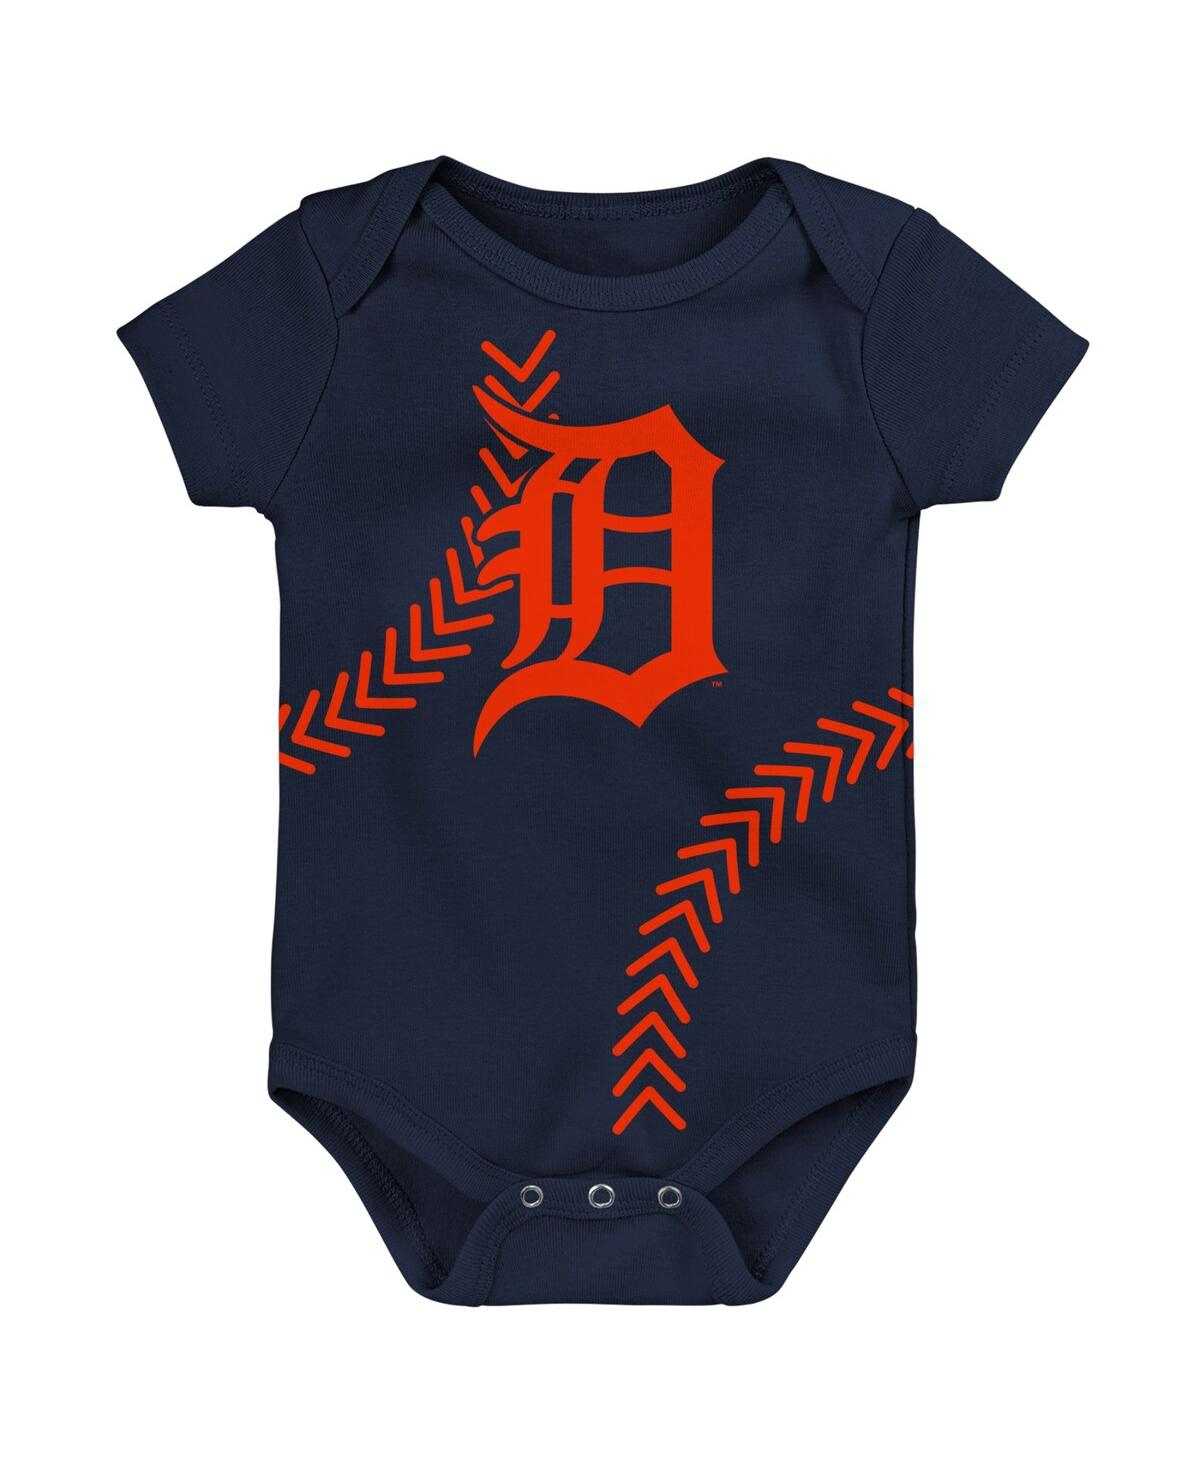 Outerstuff Babies' Newborn And Infant Boys And Girls Navy Detroit Tigers Running Home Bodysuit